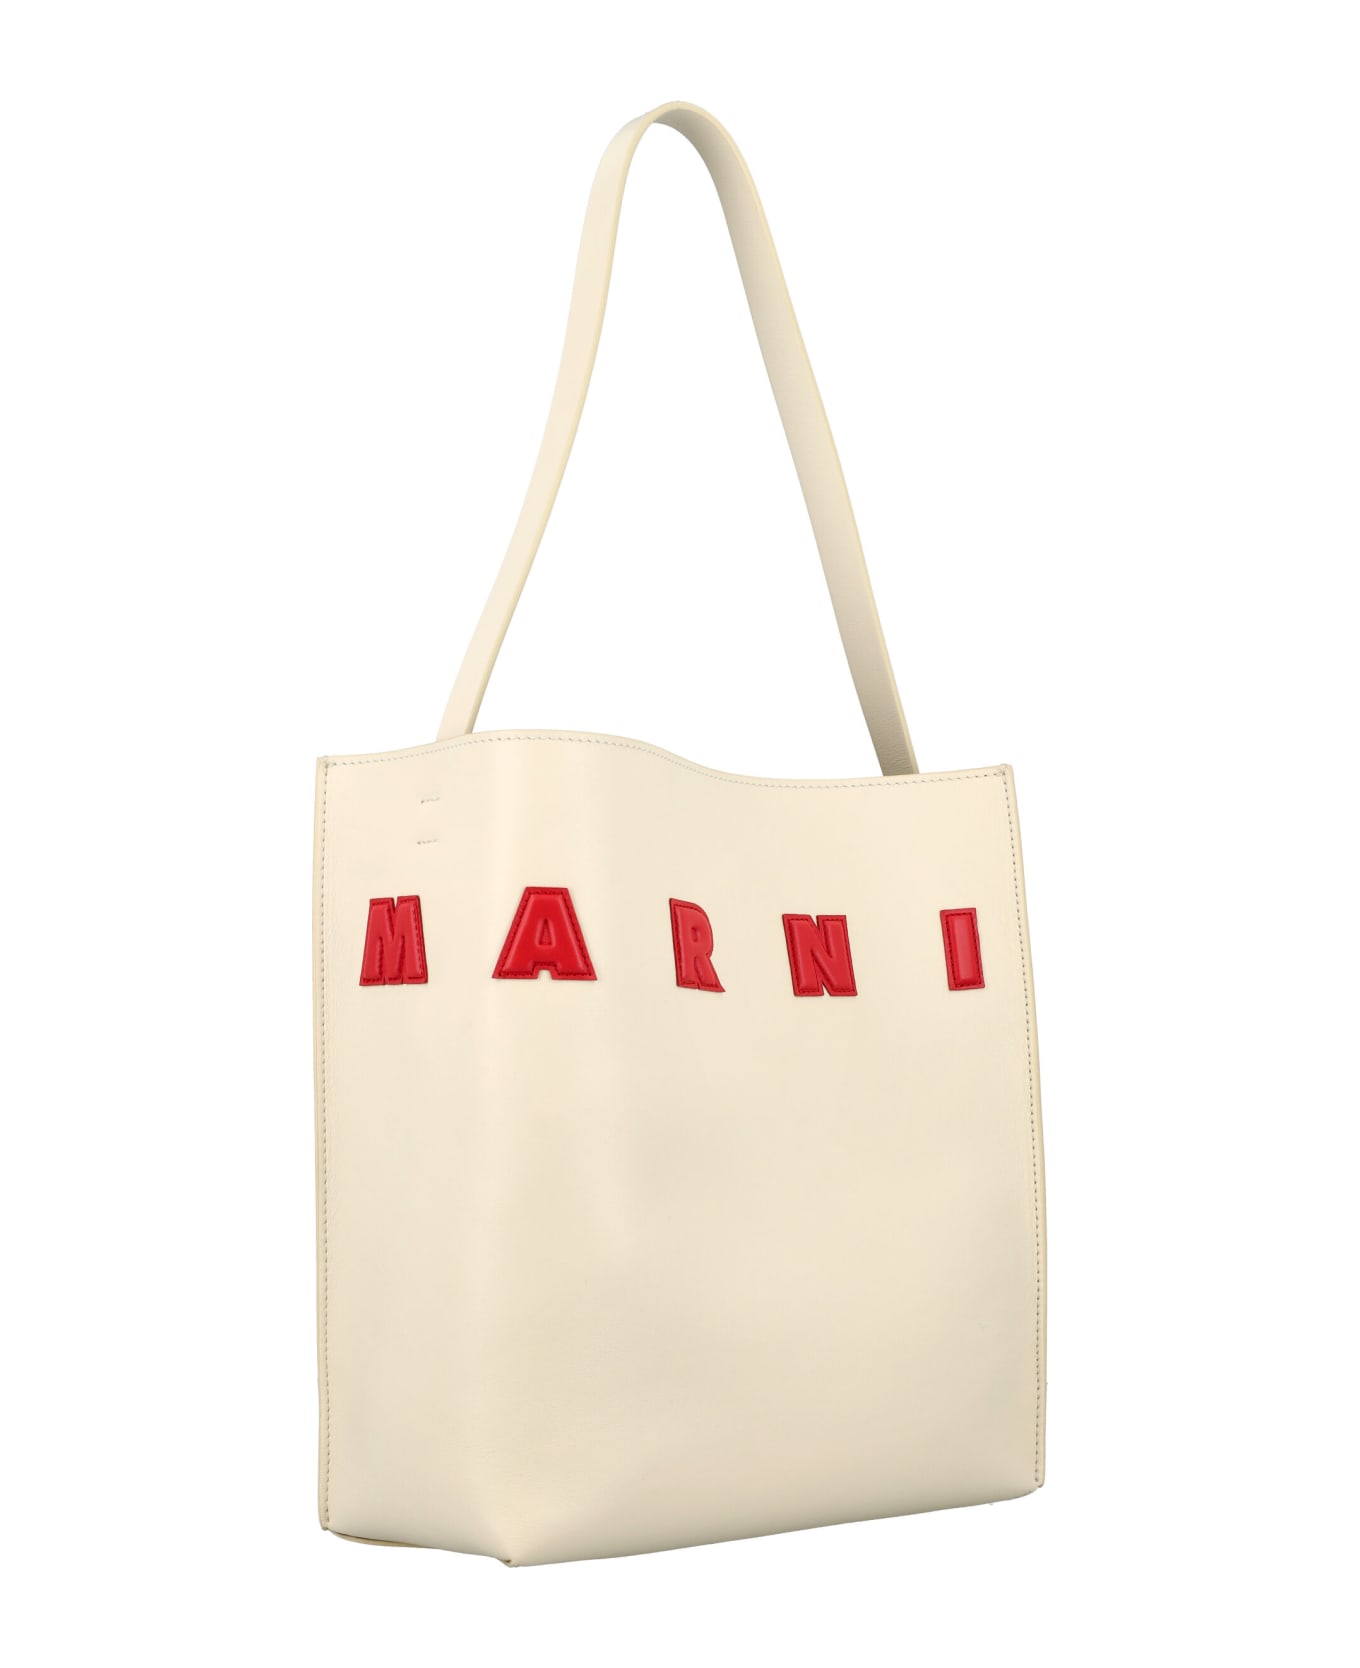 Marni Mall Museum Tote Bag - White トートバッグ